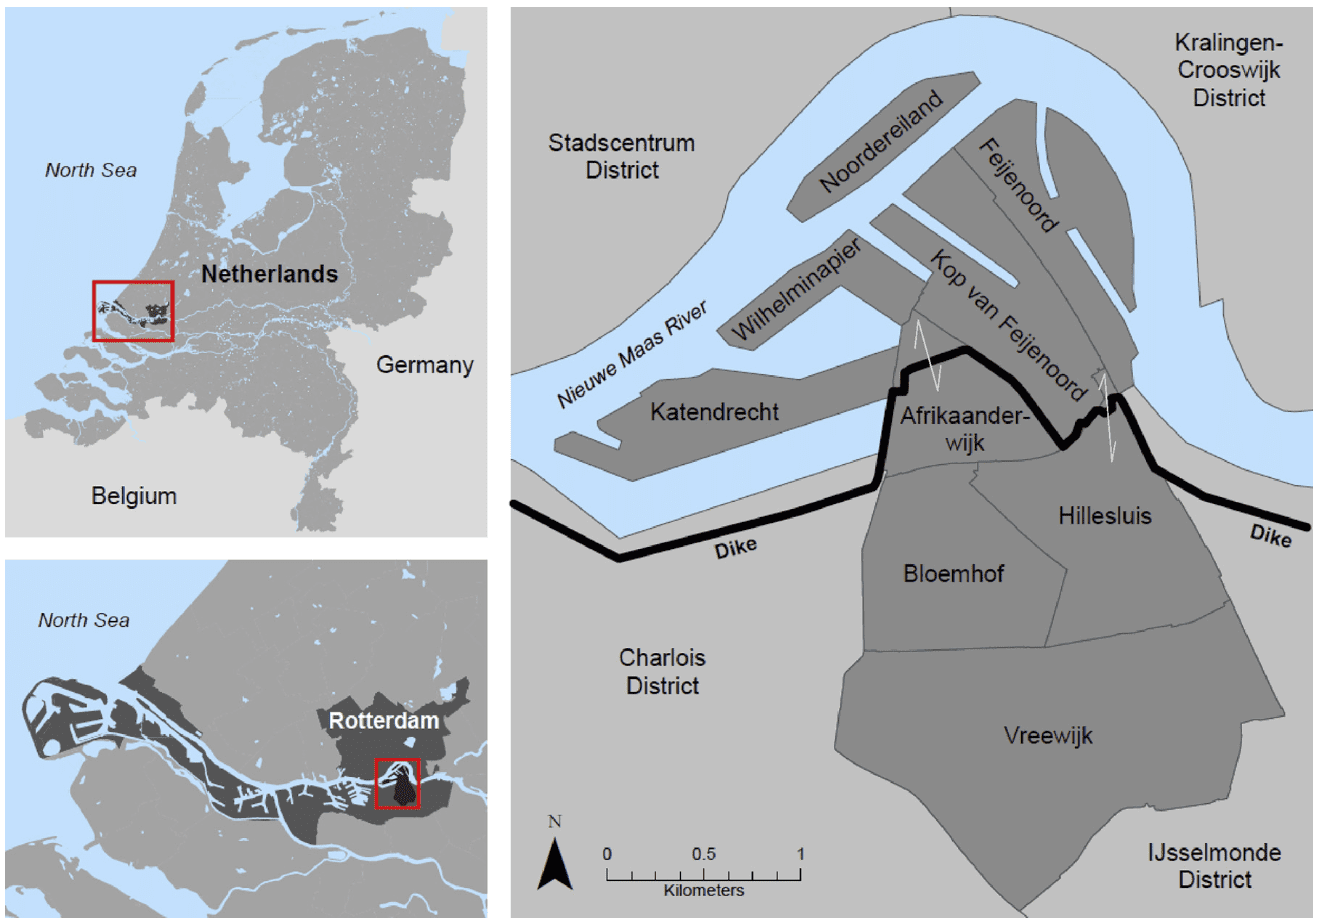 Figure 1: Neighborhoods in Feijenoord District, with locator maps of the Netherlands and Rotterdam.